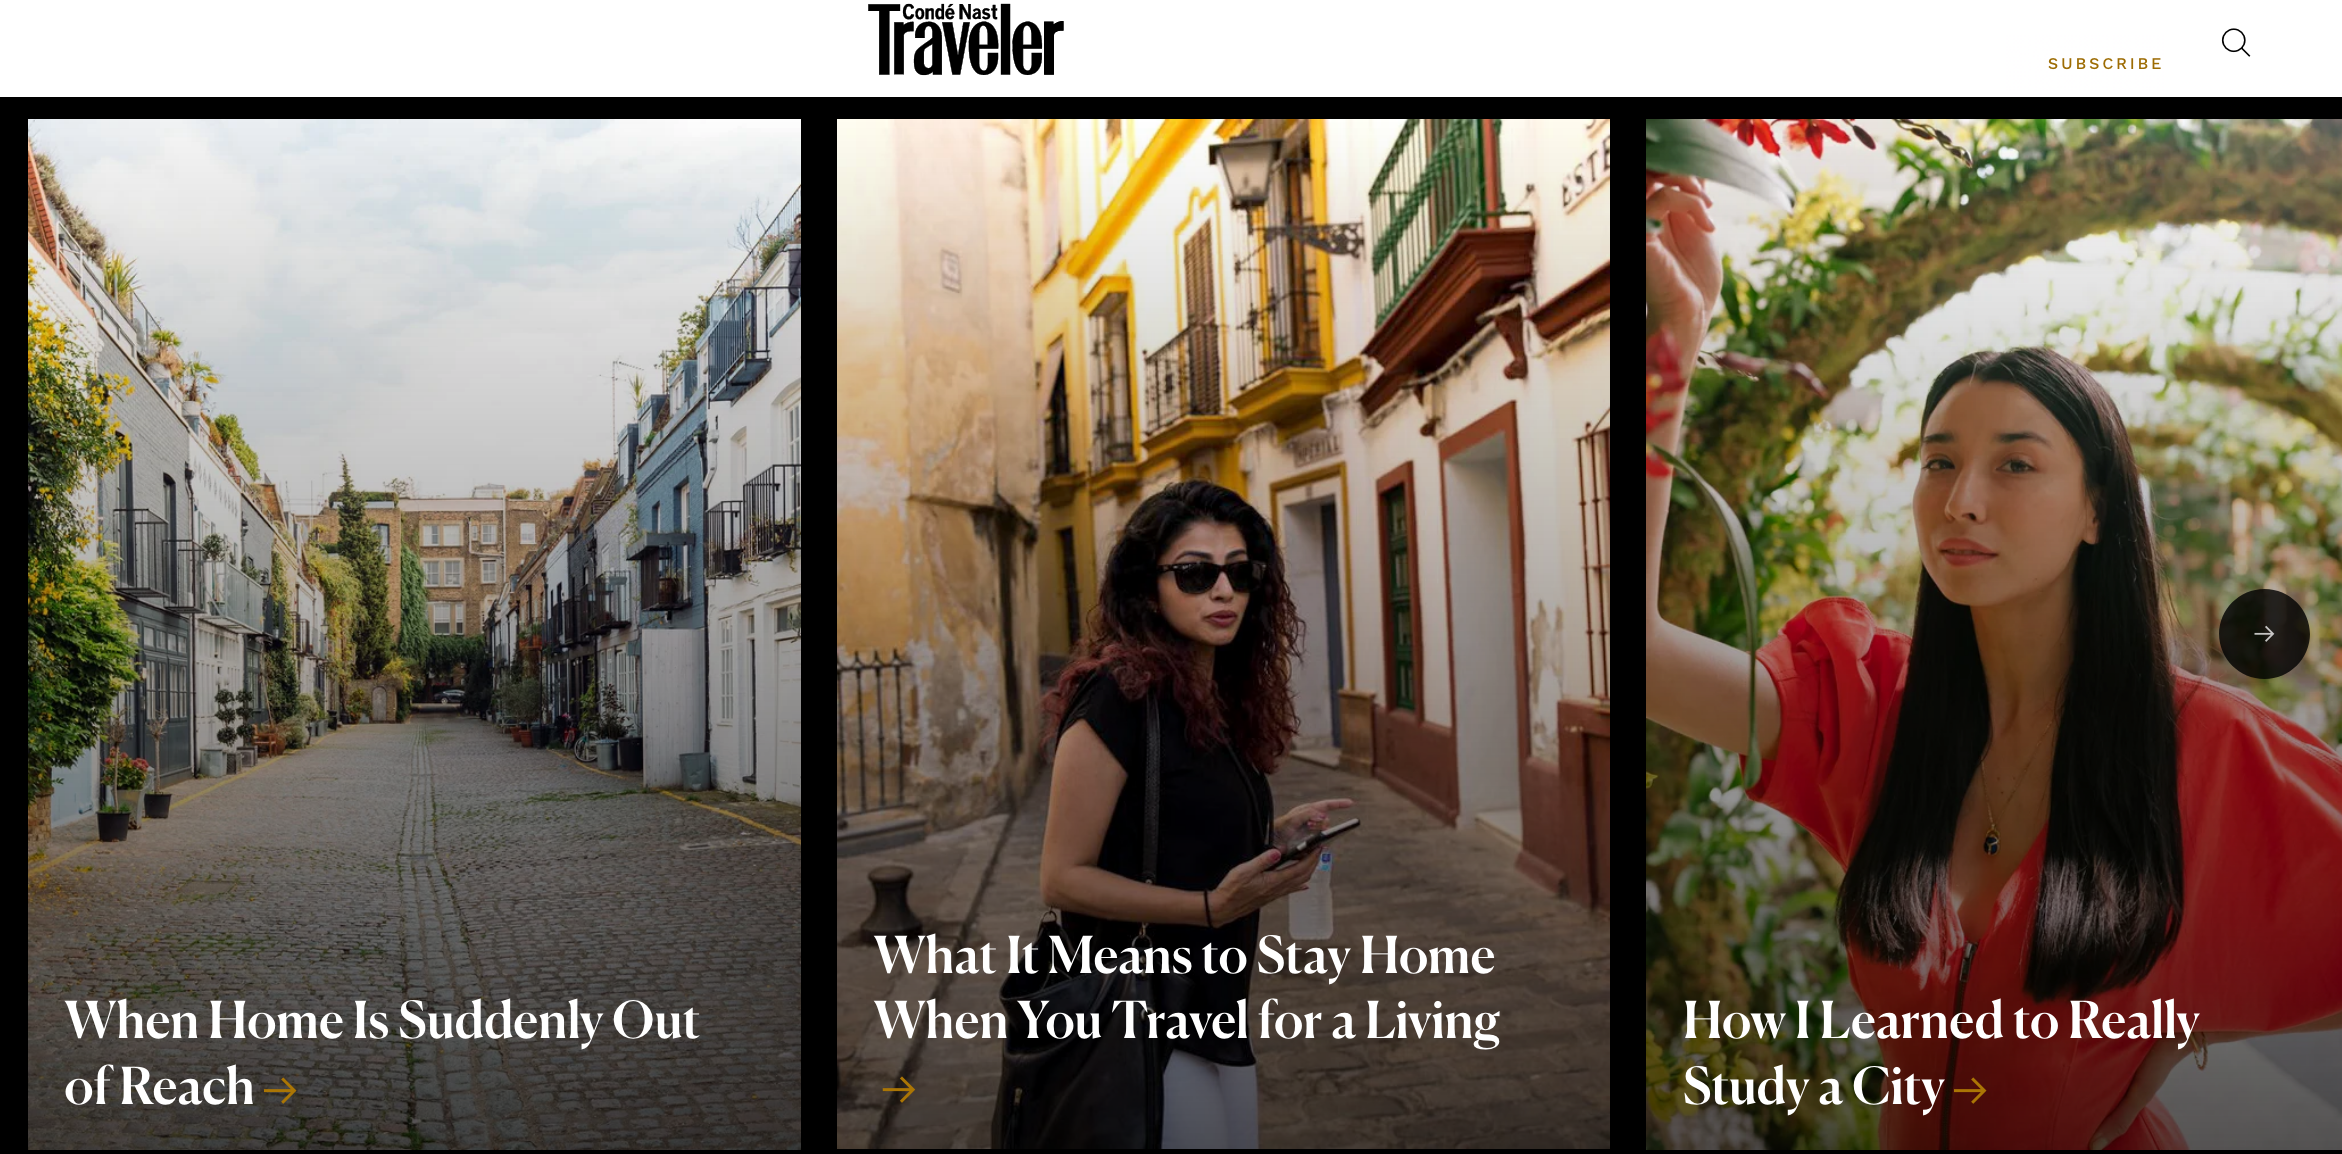 Condé Nast Traveler: What It Means to Stay Home When You Travel for a Living